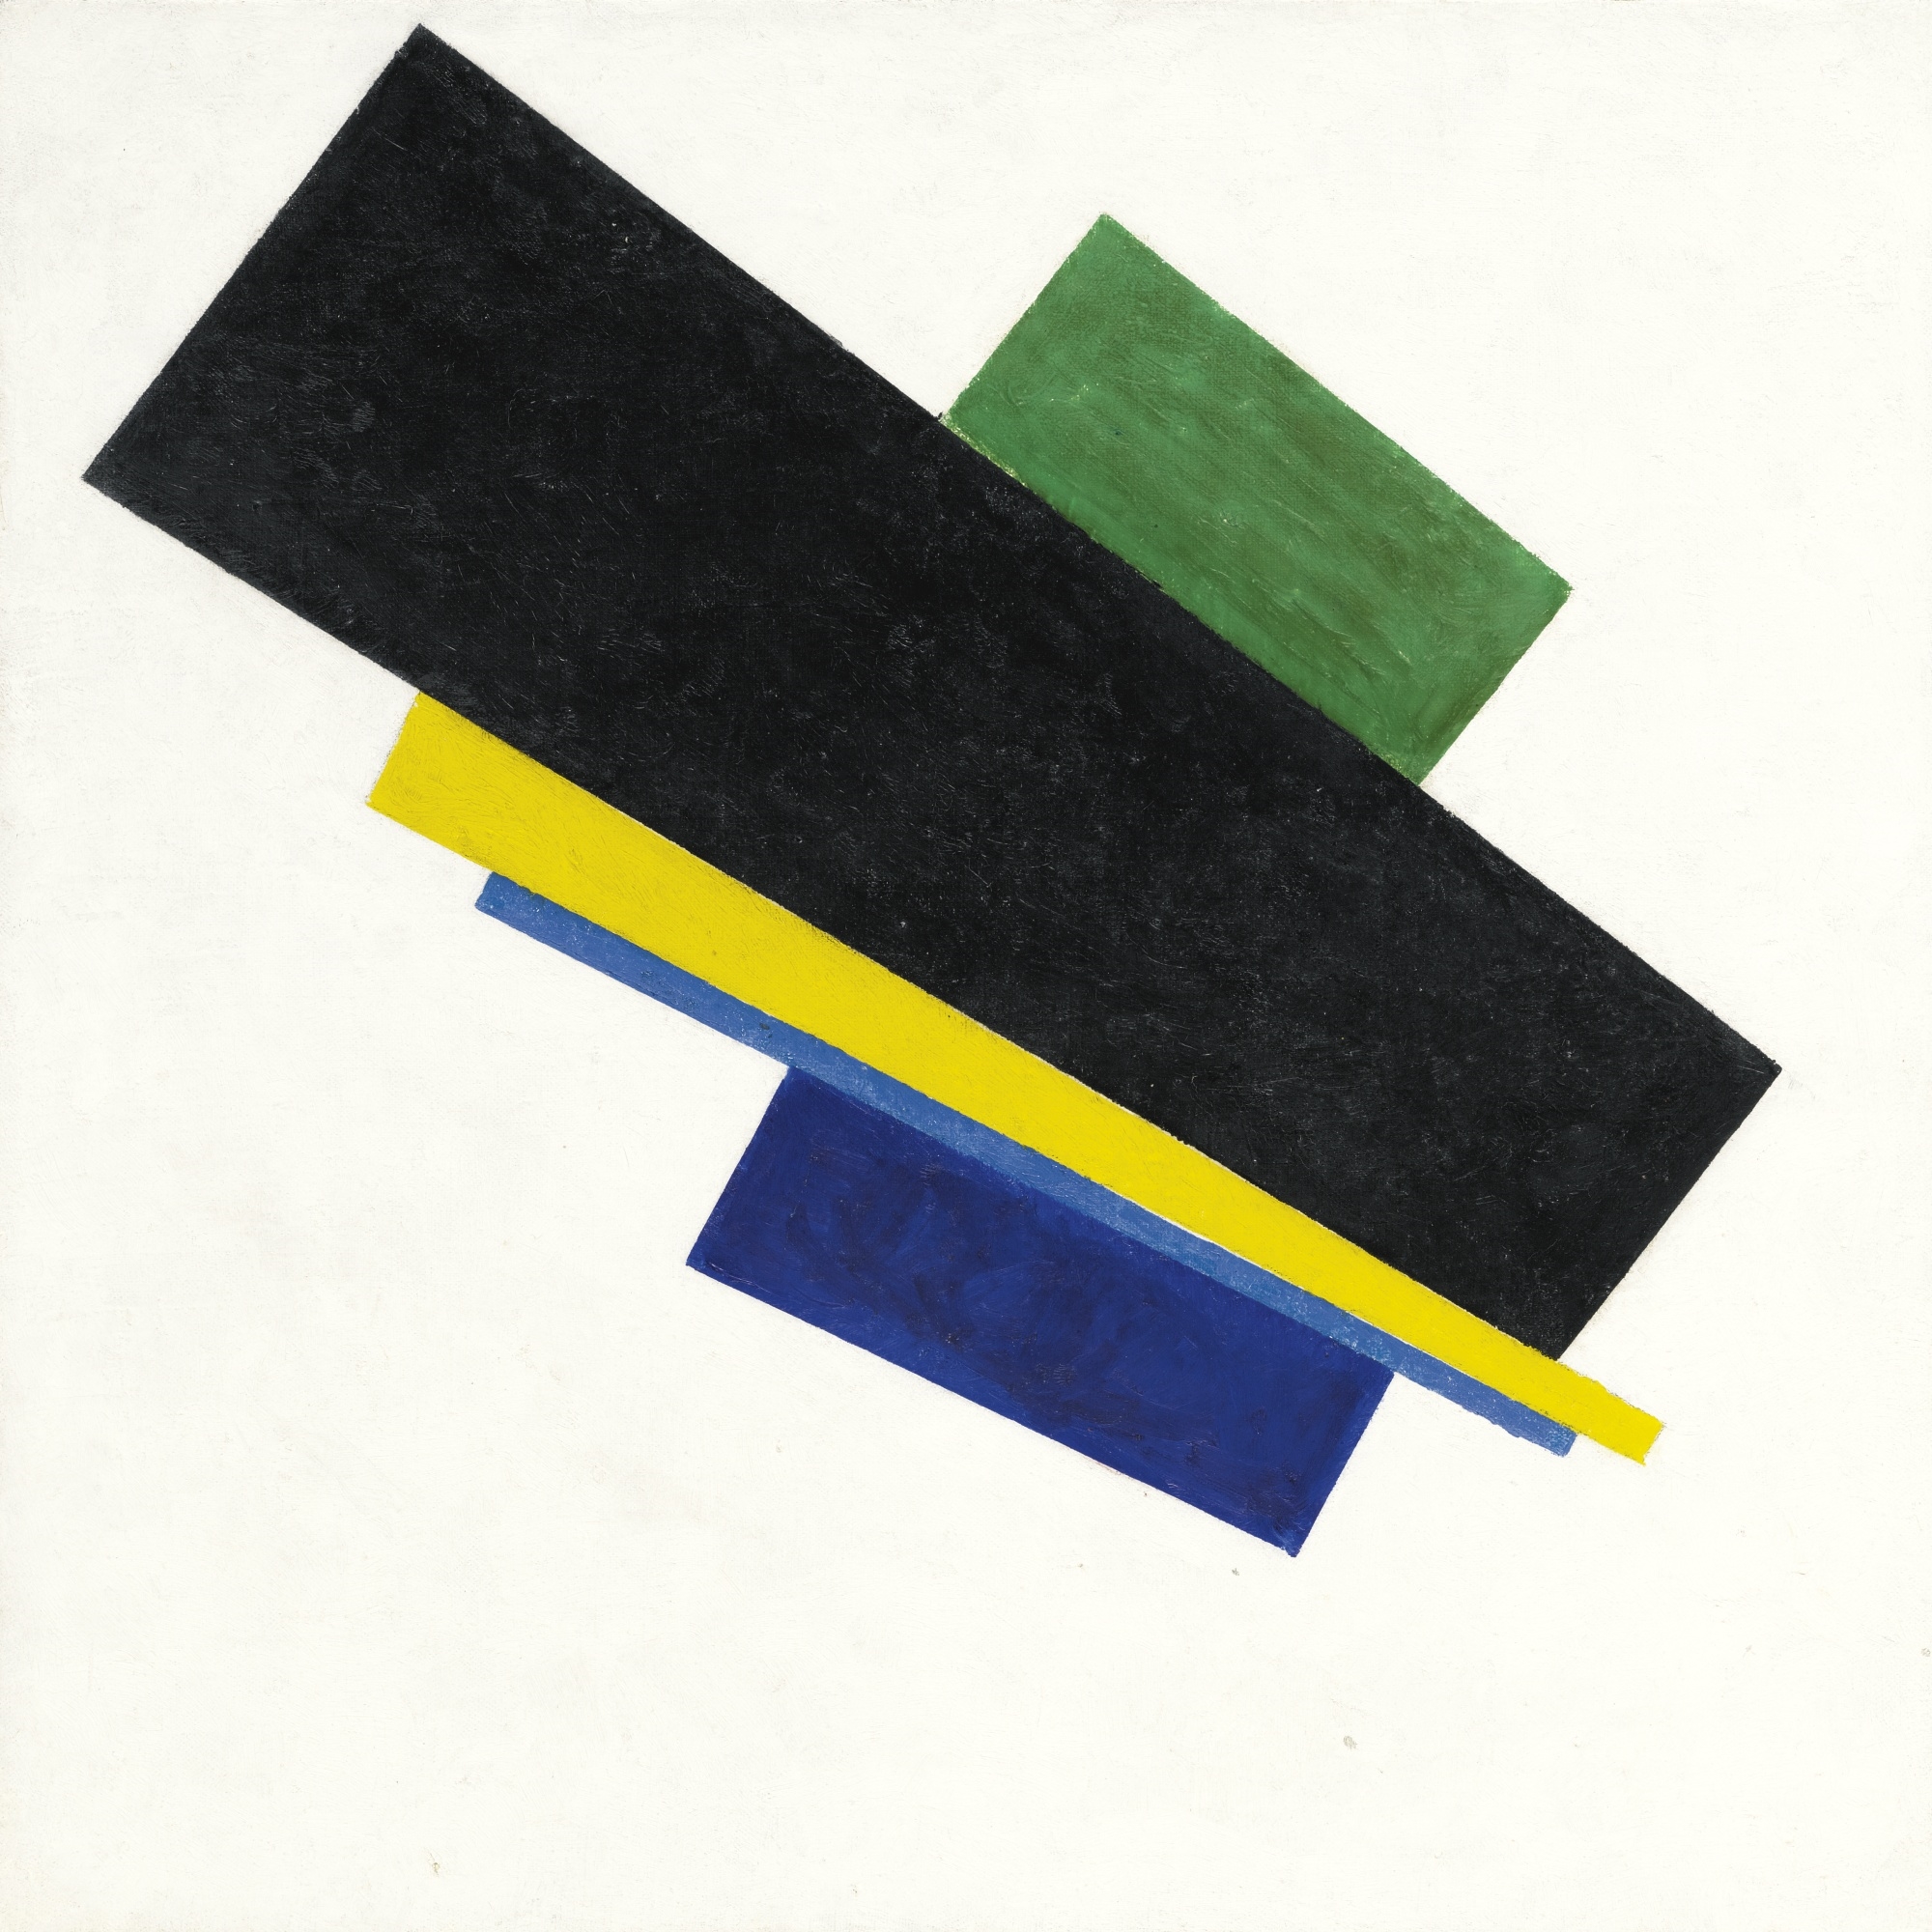 SUPREMATISM, 18TH CONSTRUCTION by Kazimir Malevich, 1915